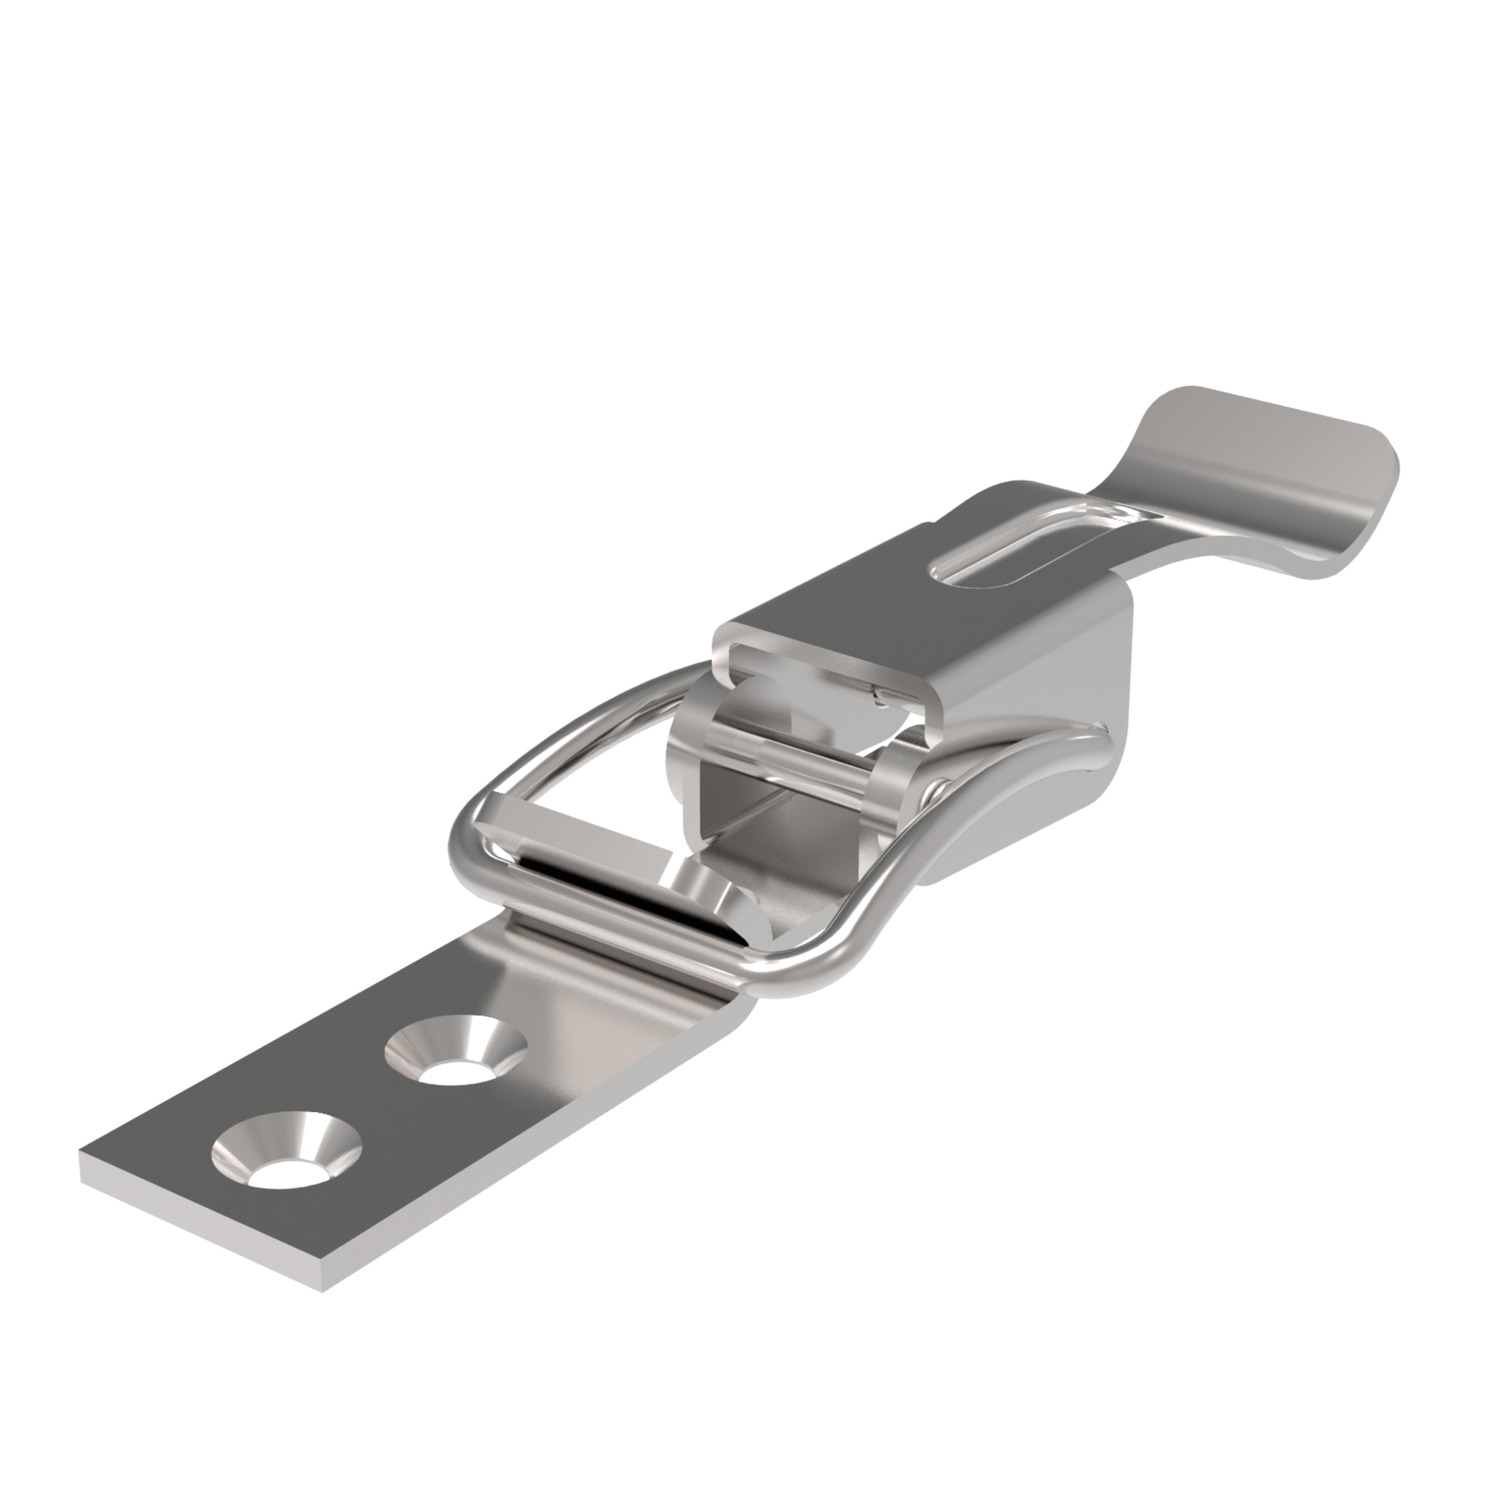 Toggle Latches Simple fixed draw type toggle latch available in steel or stainless steel. Counter strike supplied.